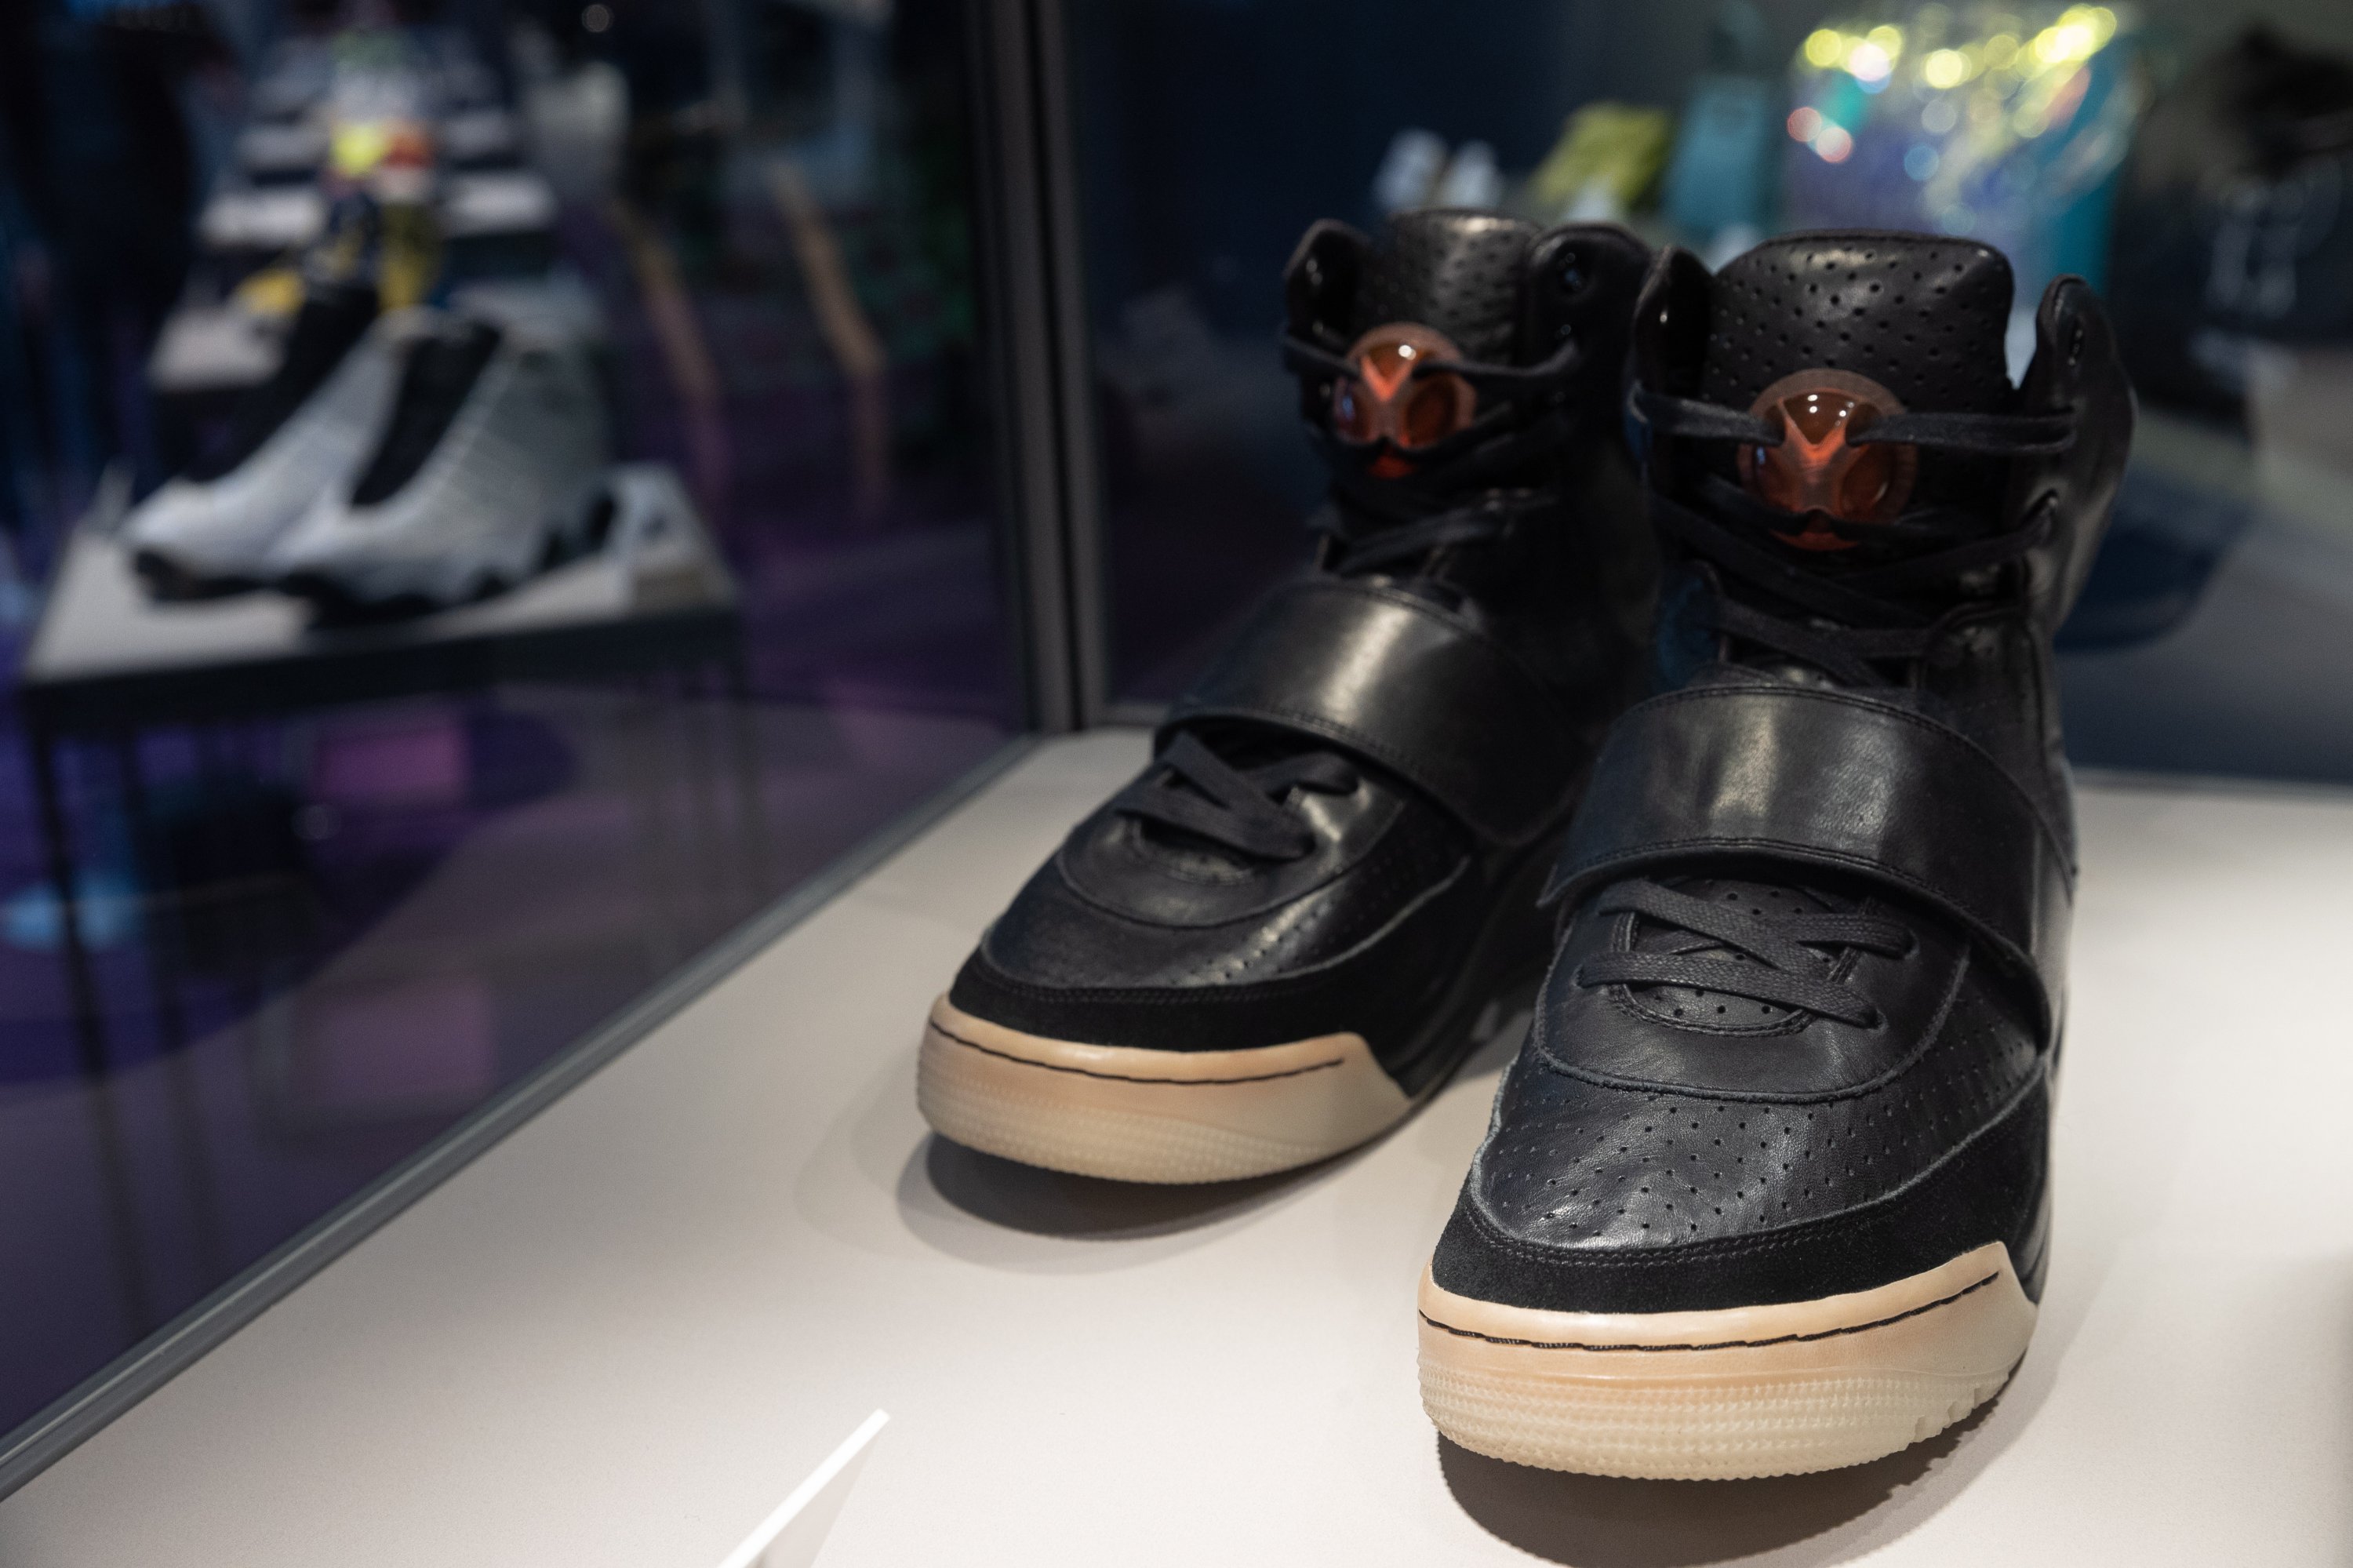 Kanye West's Nike sneakers sold for record $1.8 mn at Sotheby's